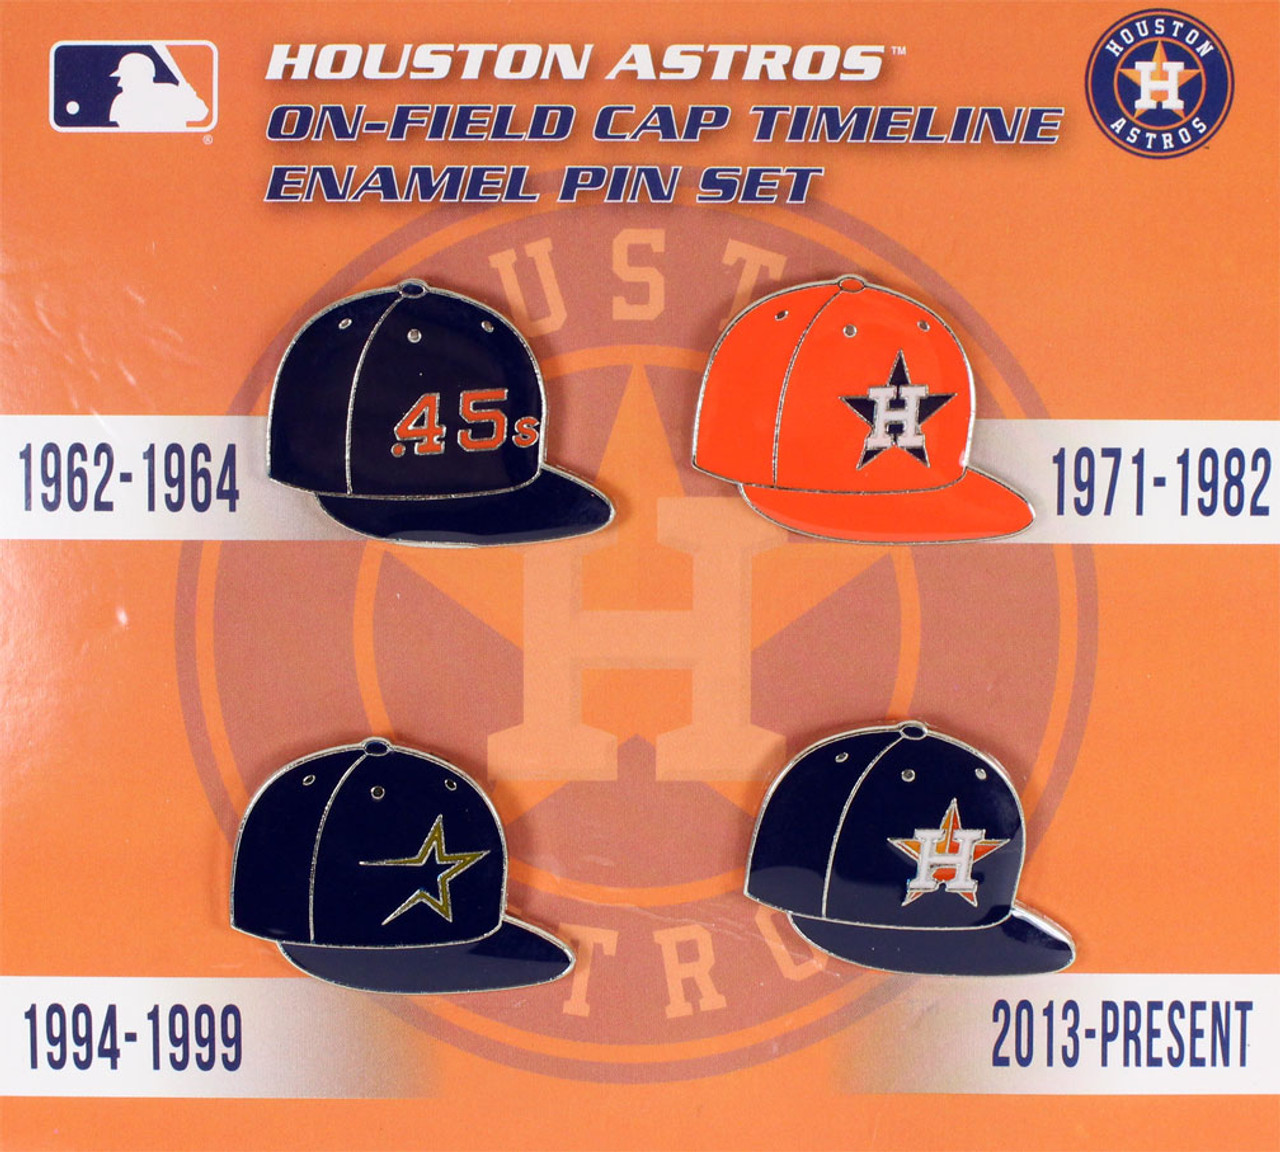 Houston Astros Cooperstown Collection Cap Timeline Pin Set